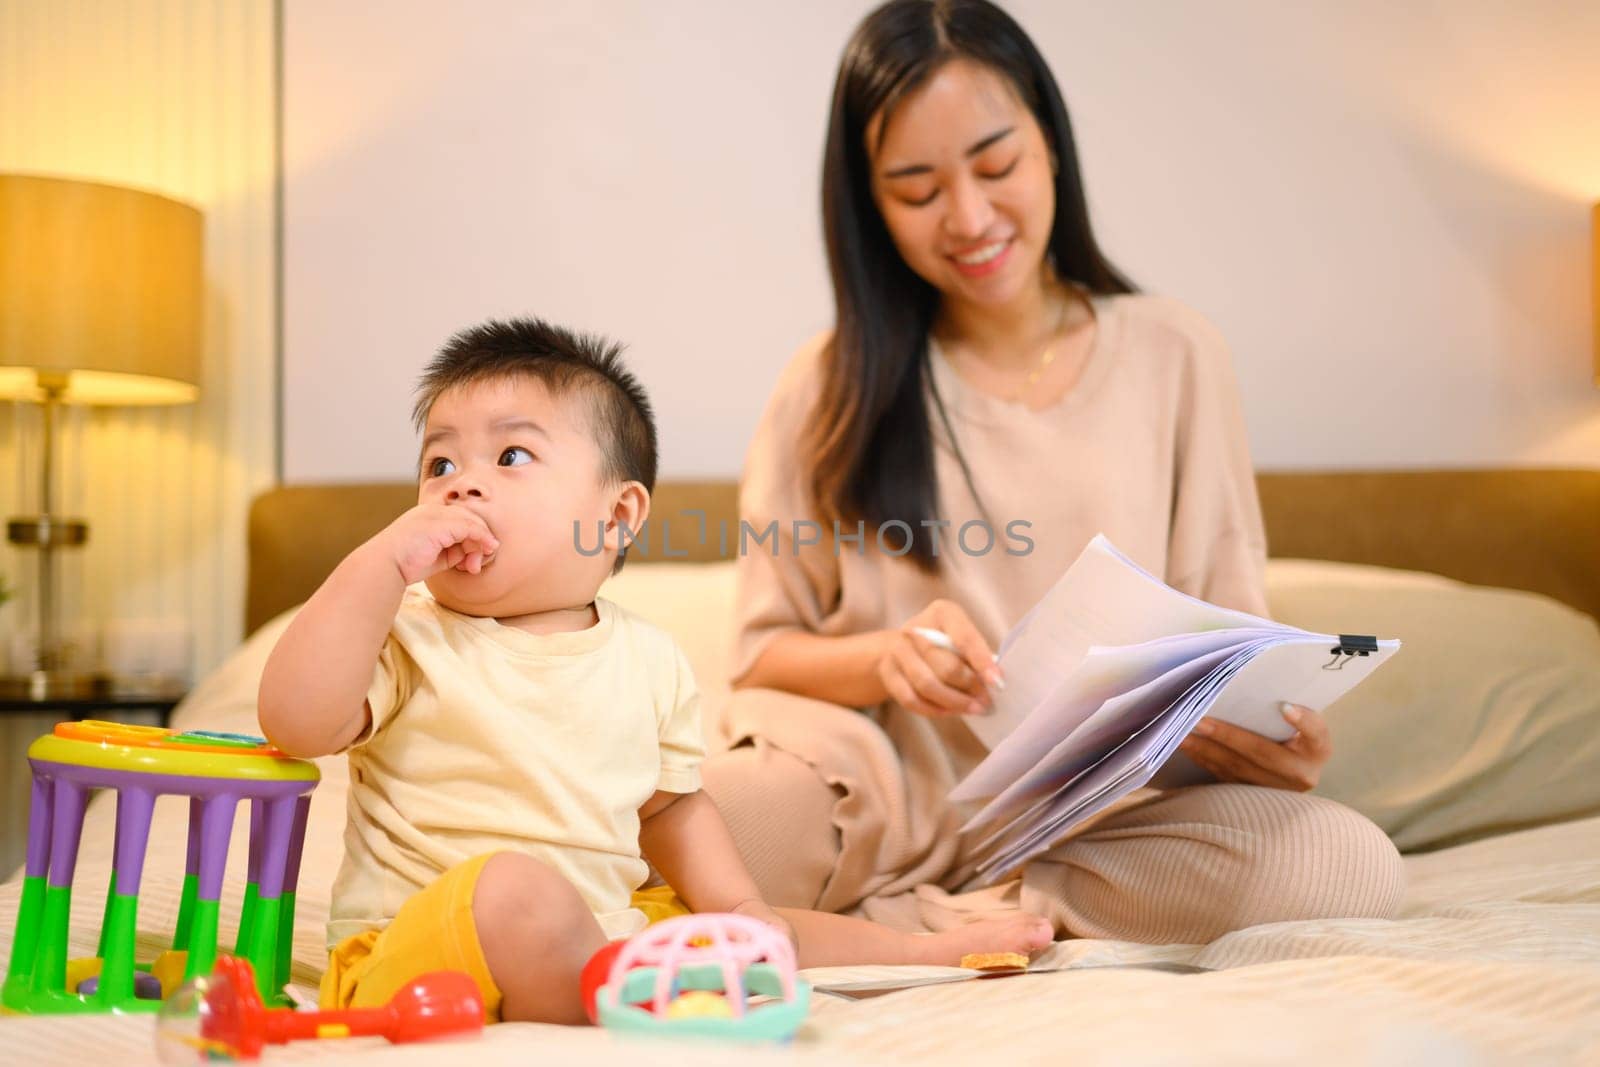 Cute baby boy playing toys on the bed next to her mother working with documents by prathanchorruangsak